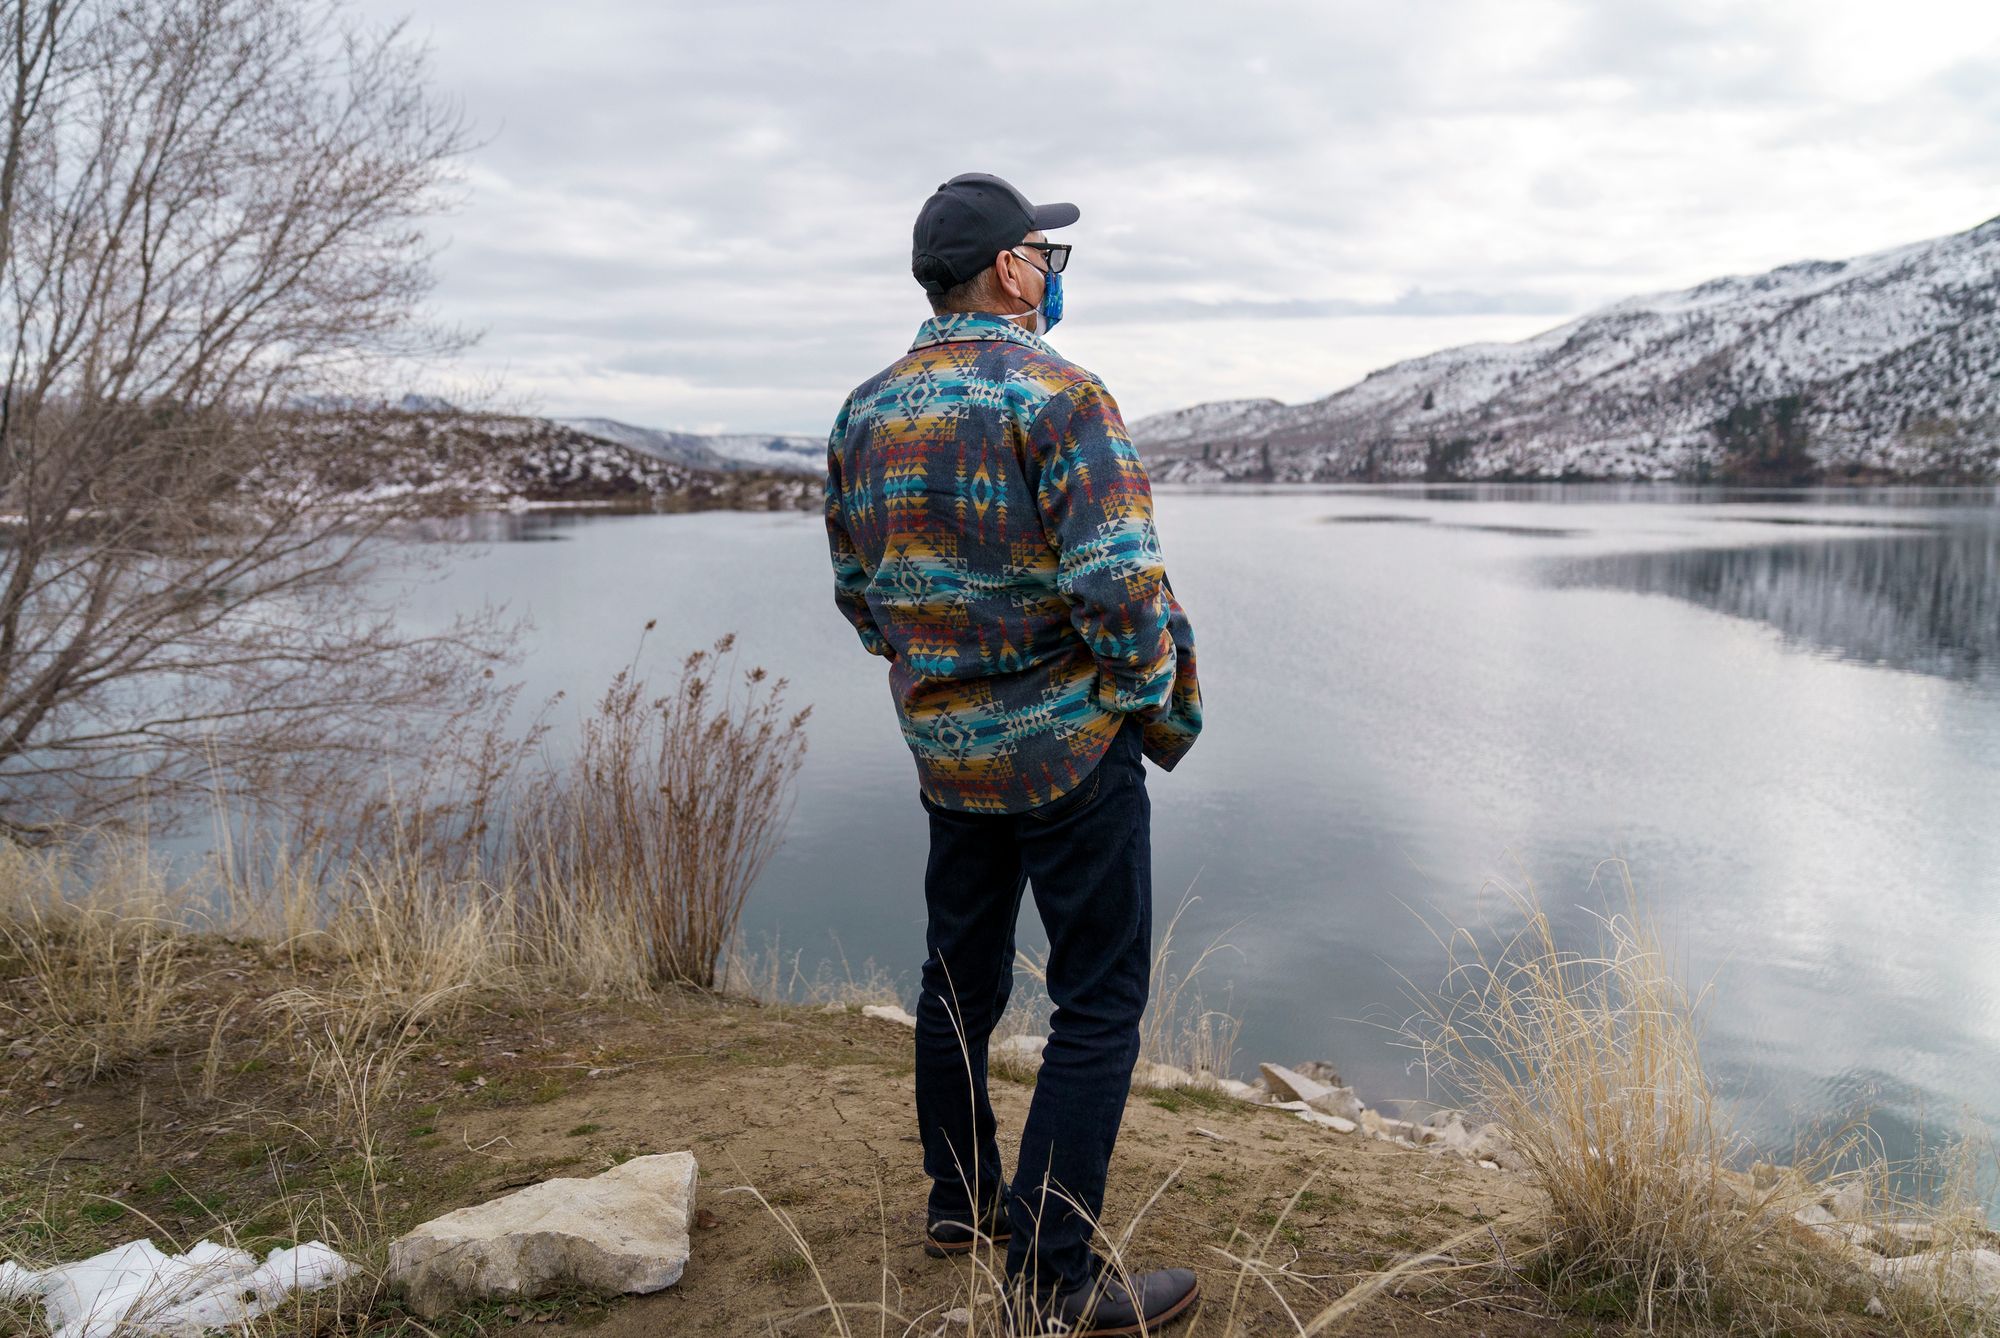 A man with his back to the camera looks over a calm body of water surrounded by snowy hills.